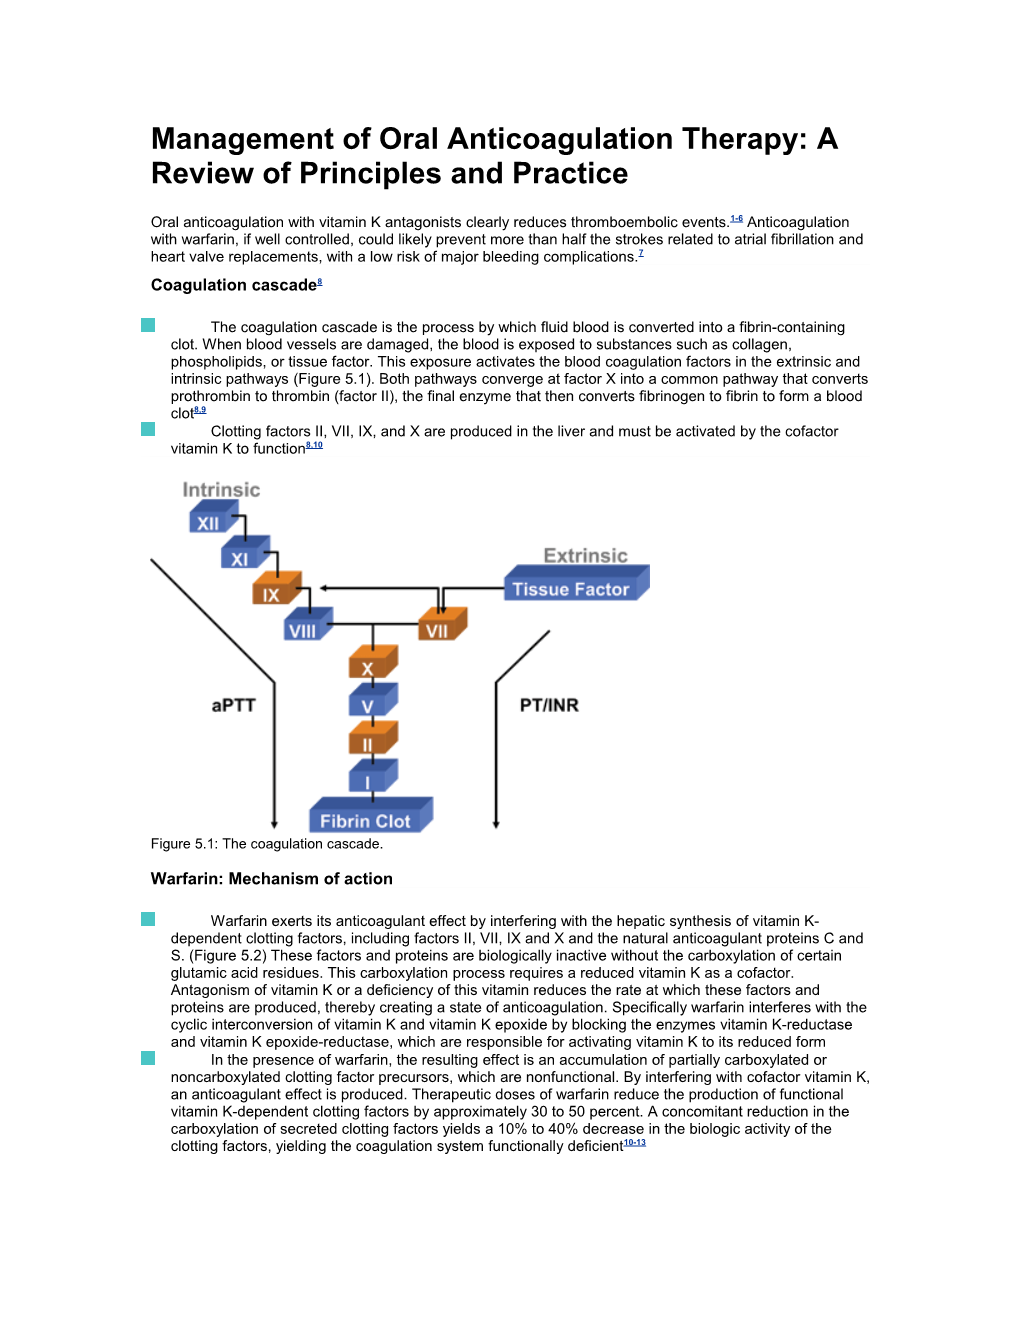 Management of Oral Anticoagulation Therapy: a Review of Principles and Practice